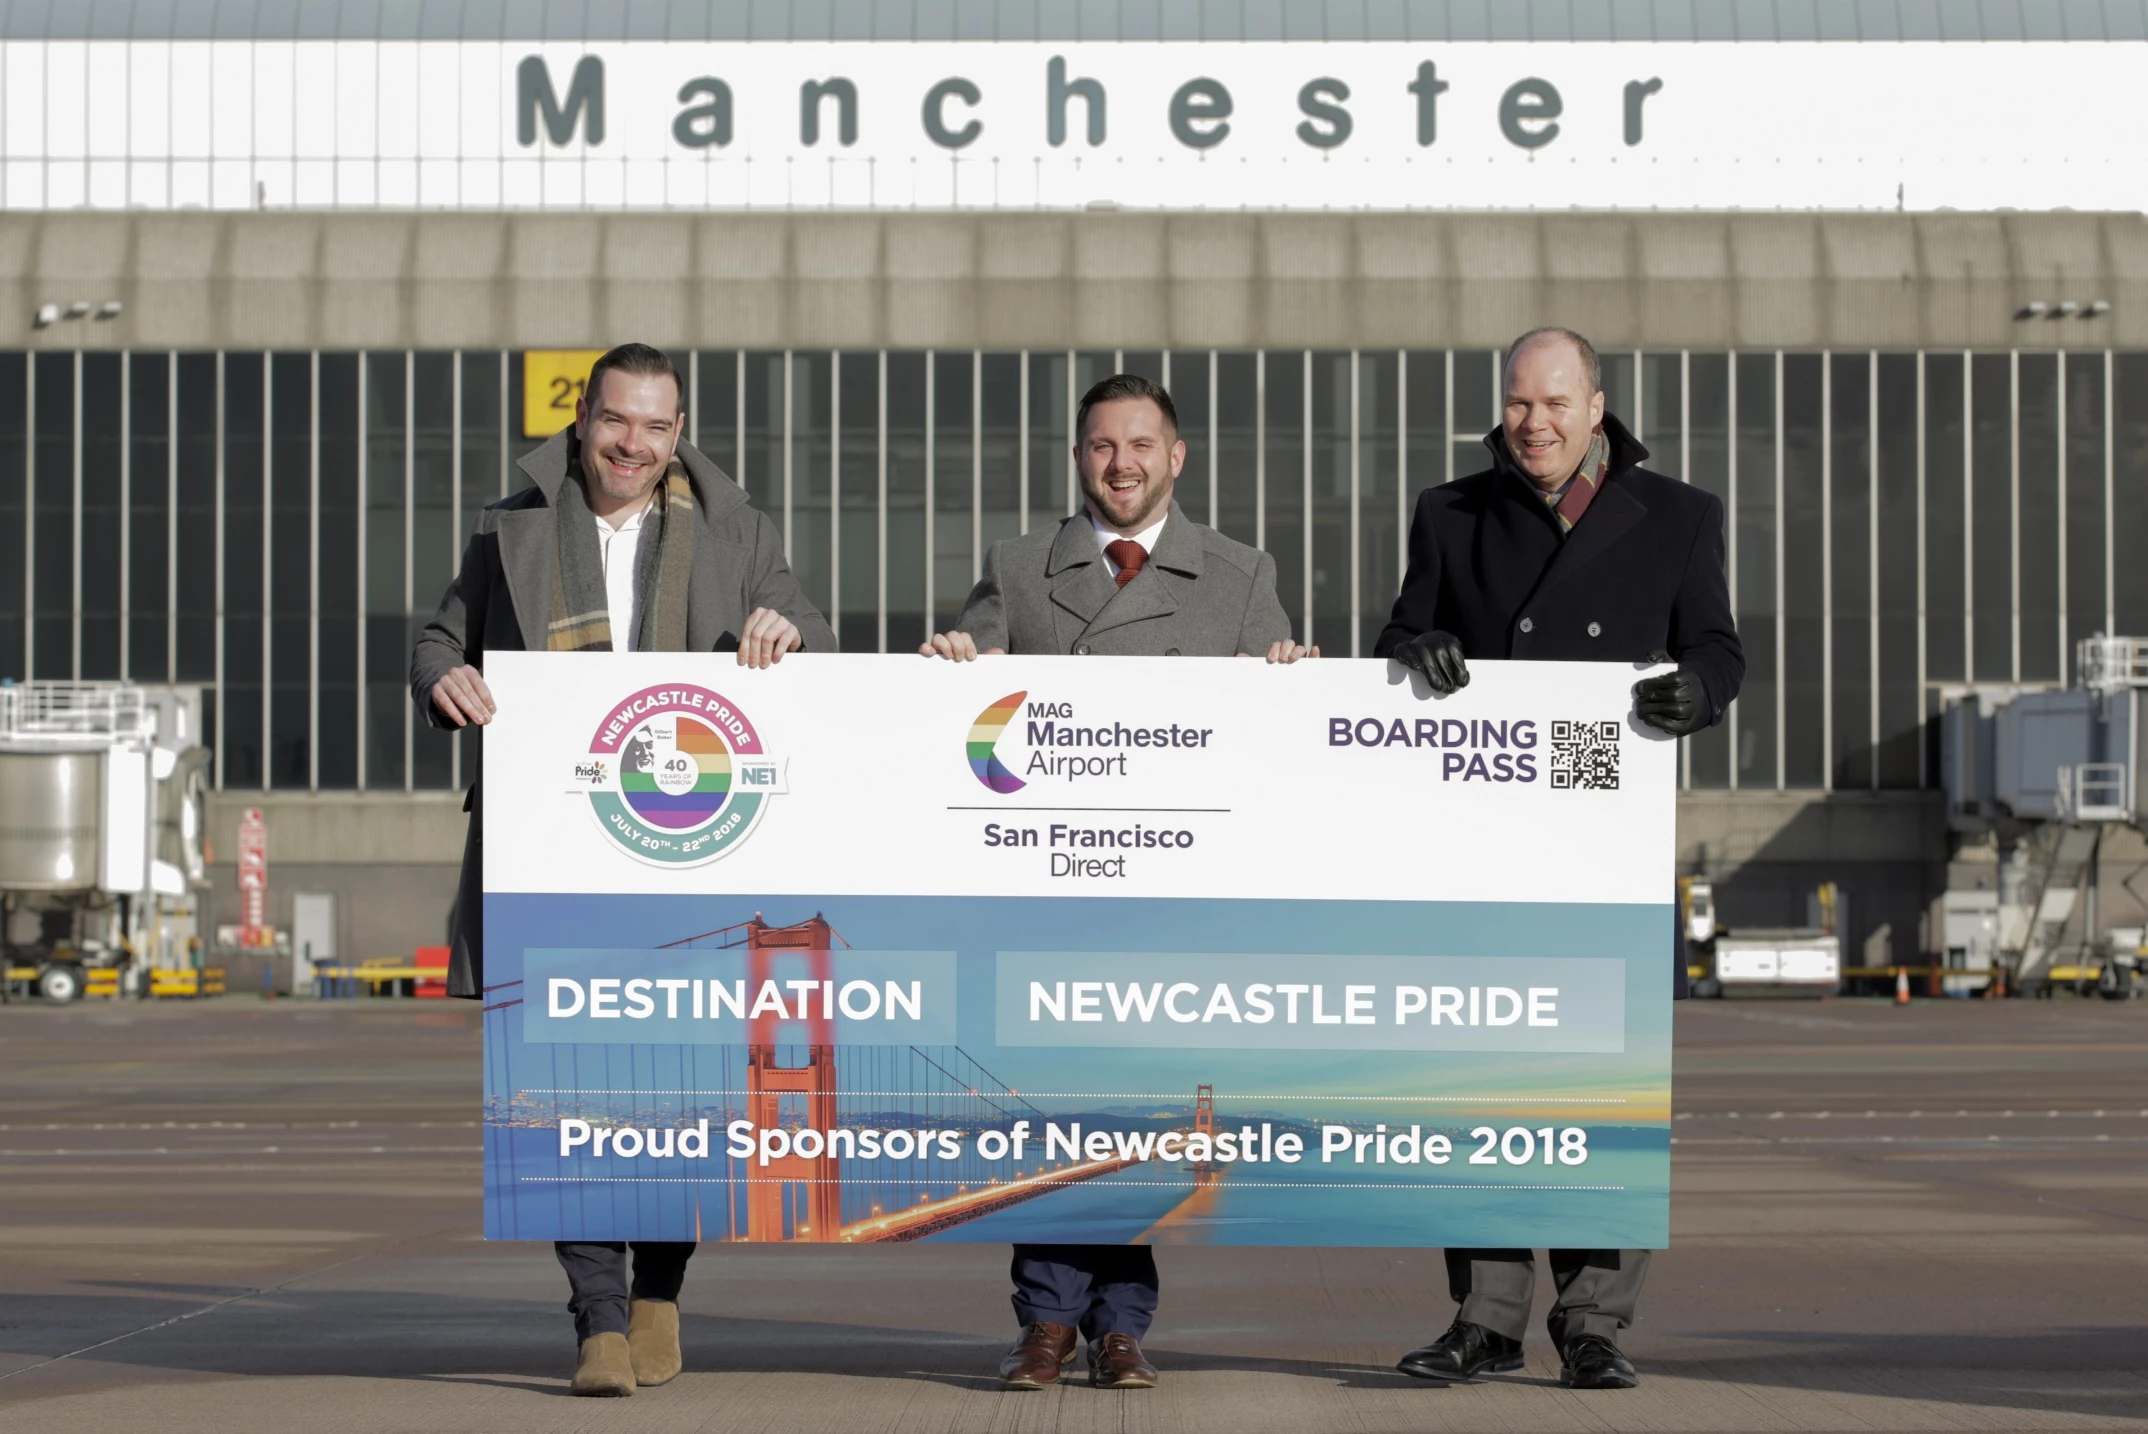 Manchester Airport sponsors Newcastle Pride 2018